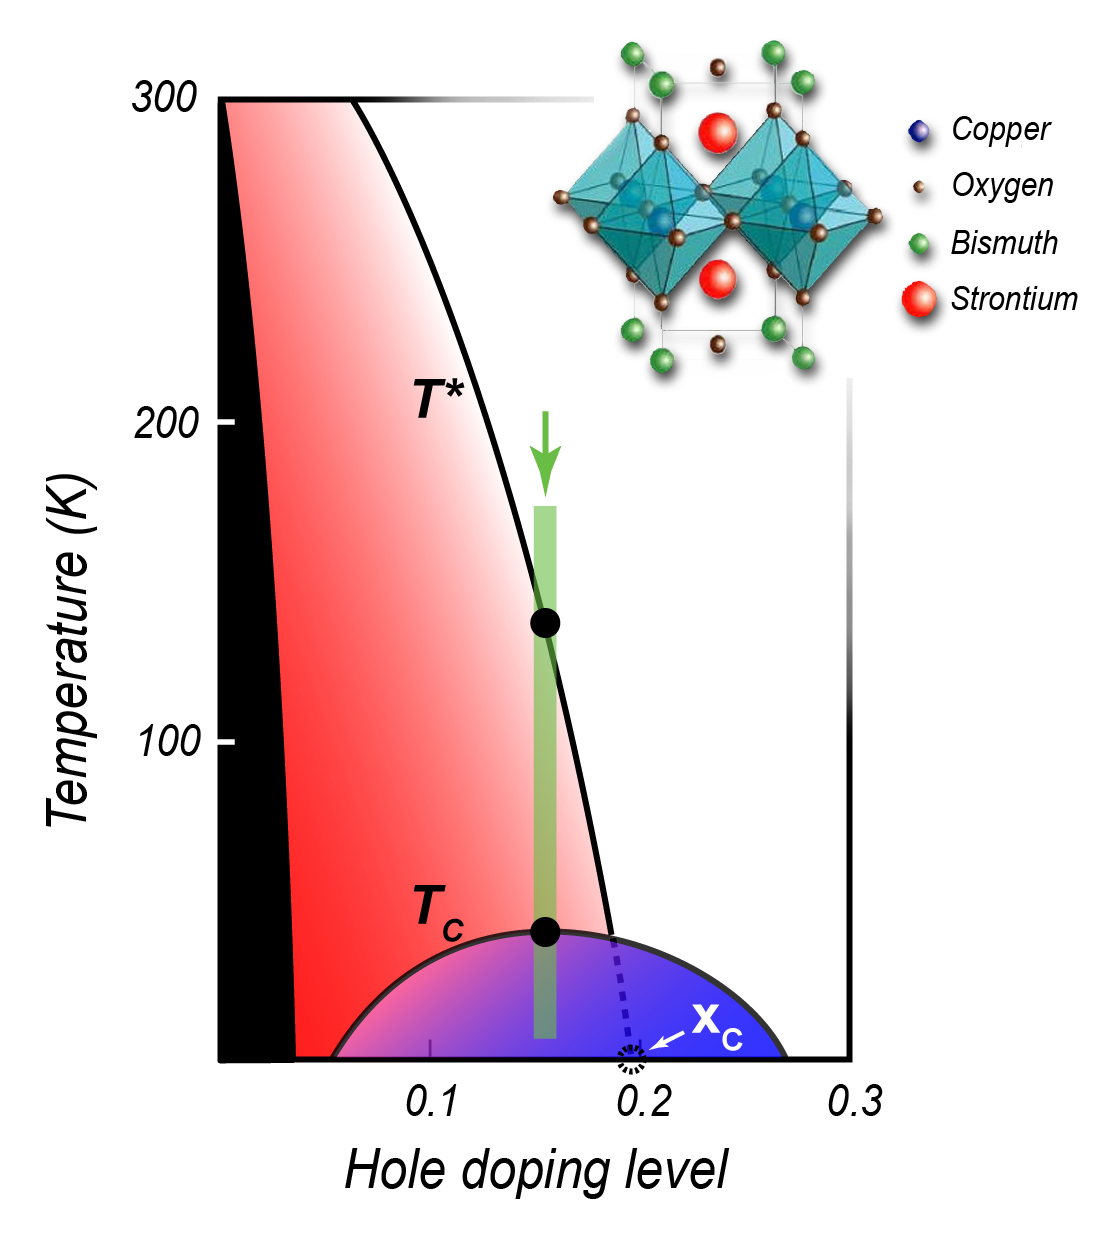 In this phase diagram common to many cuprate superconductors, the insulating phase typical of undoped cuprate compounds appears at the far left (black). Other phases appear with increased hole doping – the dome-shaped superconducting phase below Tc (blue), the mysterious pseudogap below T* (red), and a “normal metallic” phase (white). New evidence from studies of Bi2201 (crystal structure inset) along the temperature range shown in green strongly supports the idea that the pseudogap is in fact a distinct phase of matter that persists into the superconducting phase. If so the T* phase transition must terminate in a quantum critical point (Xc) at zero temperature. (Click on image for best resolution.)